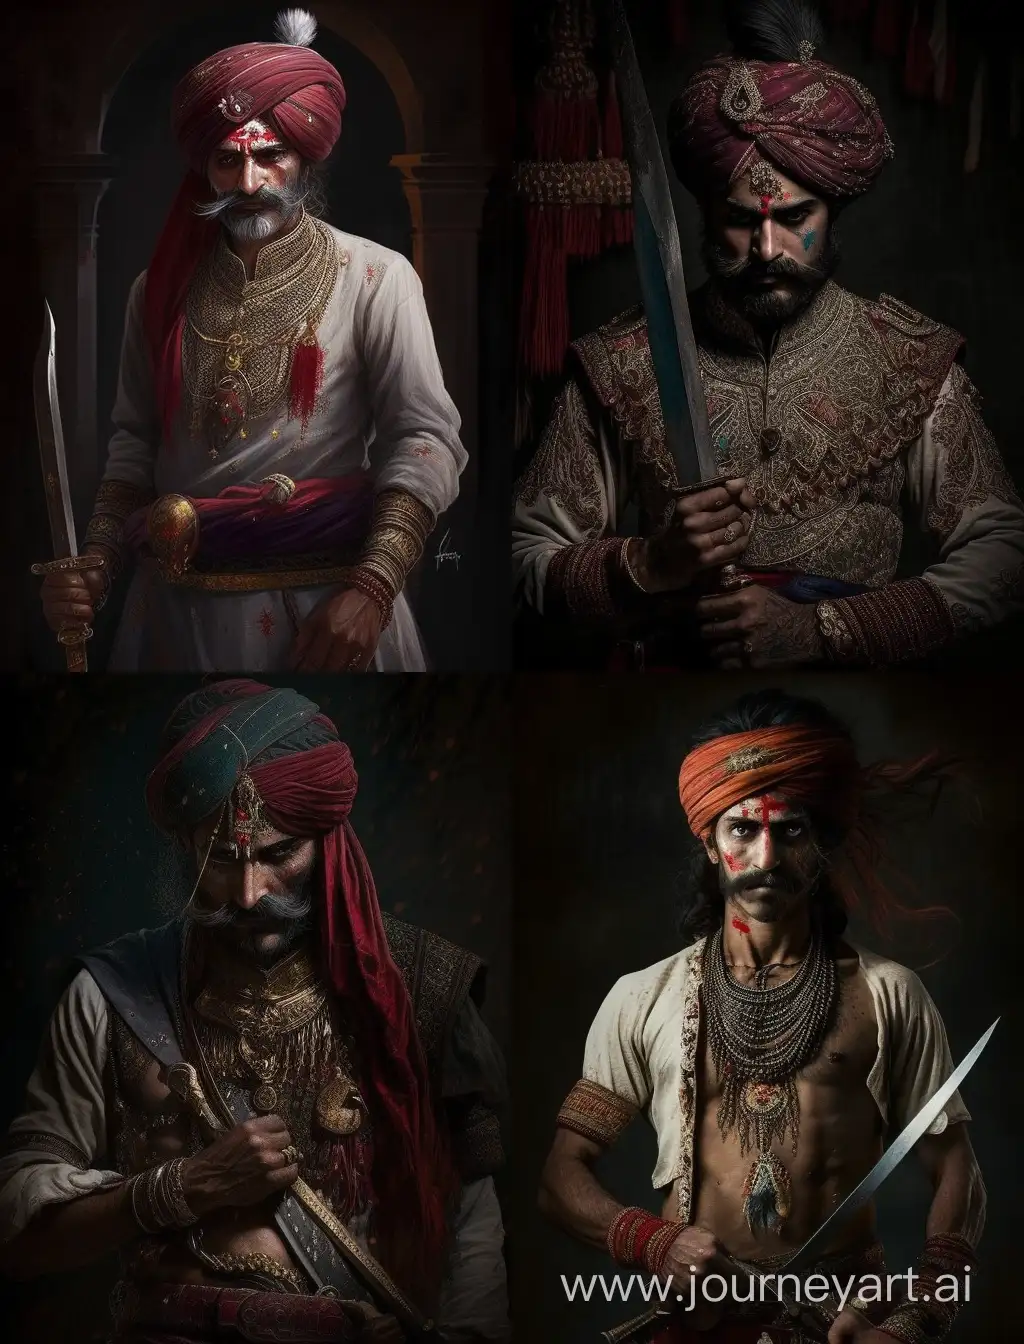 A Rajput brave man stood bleeding with a sword in his hand.